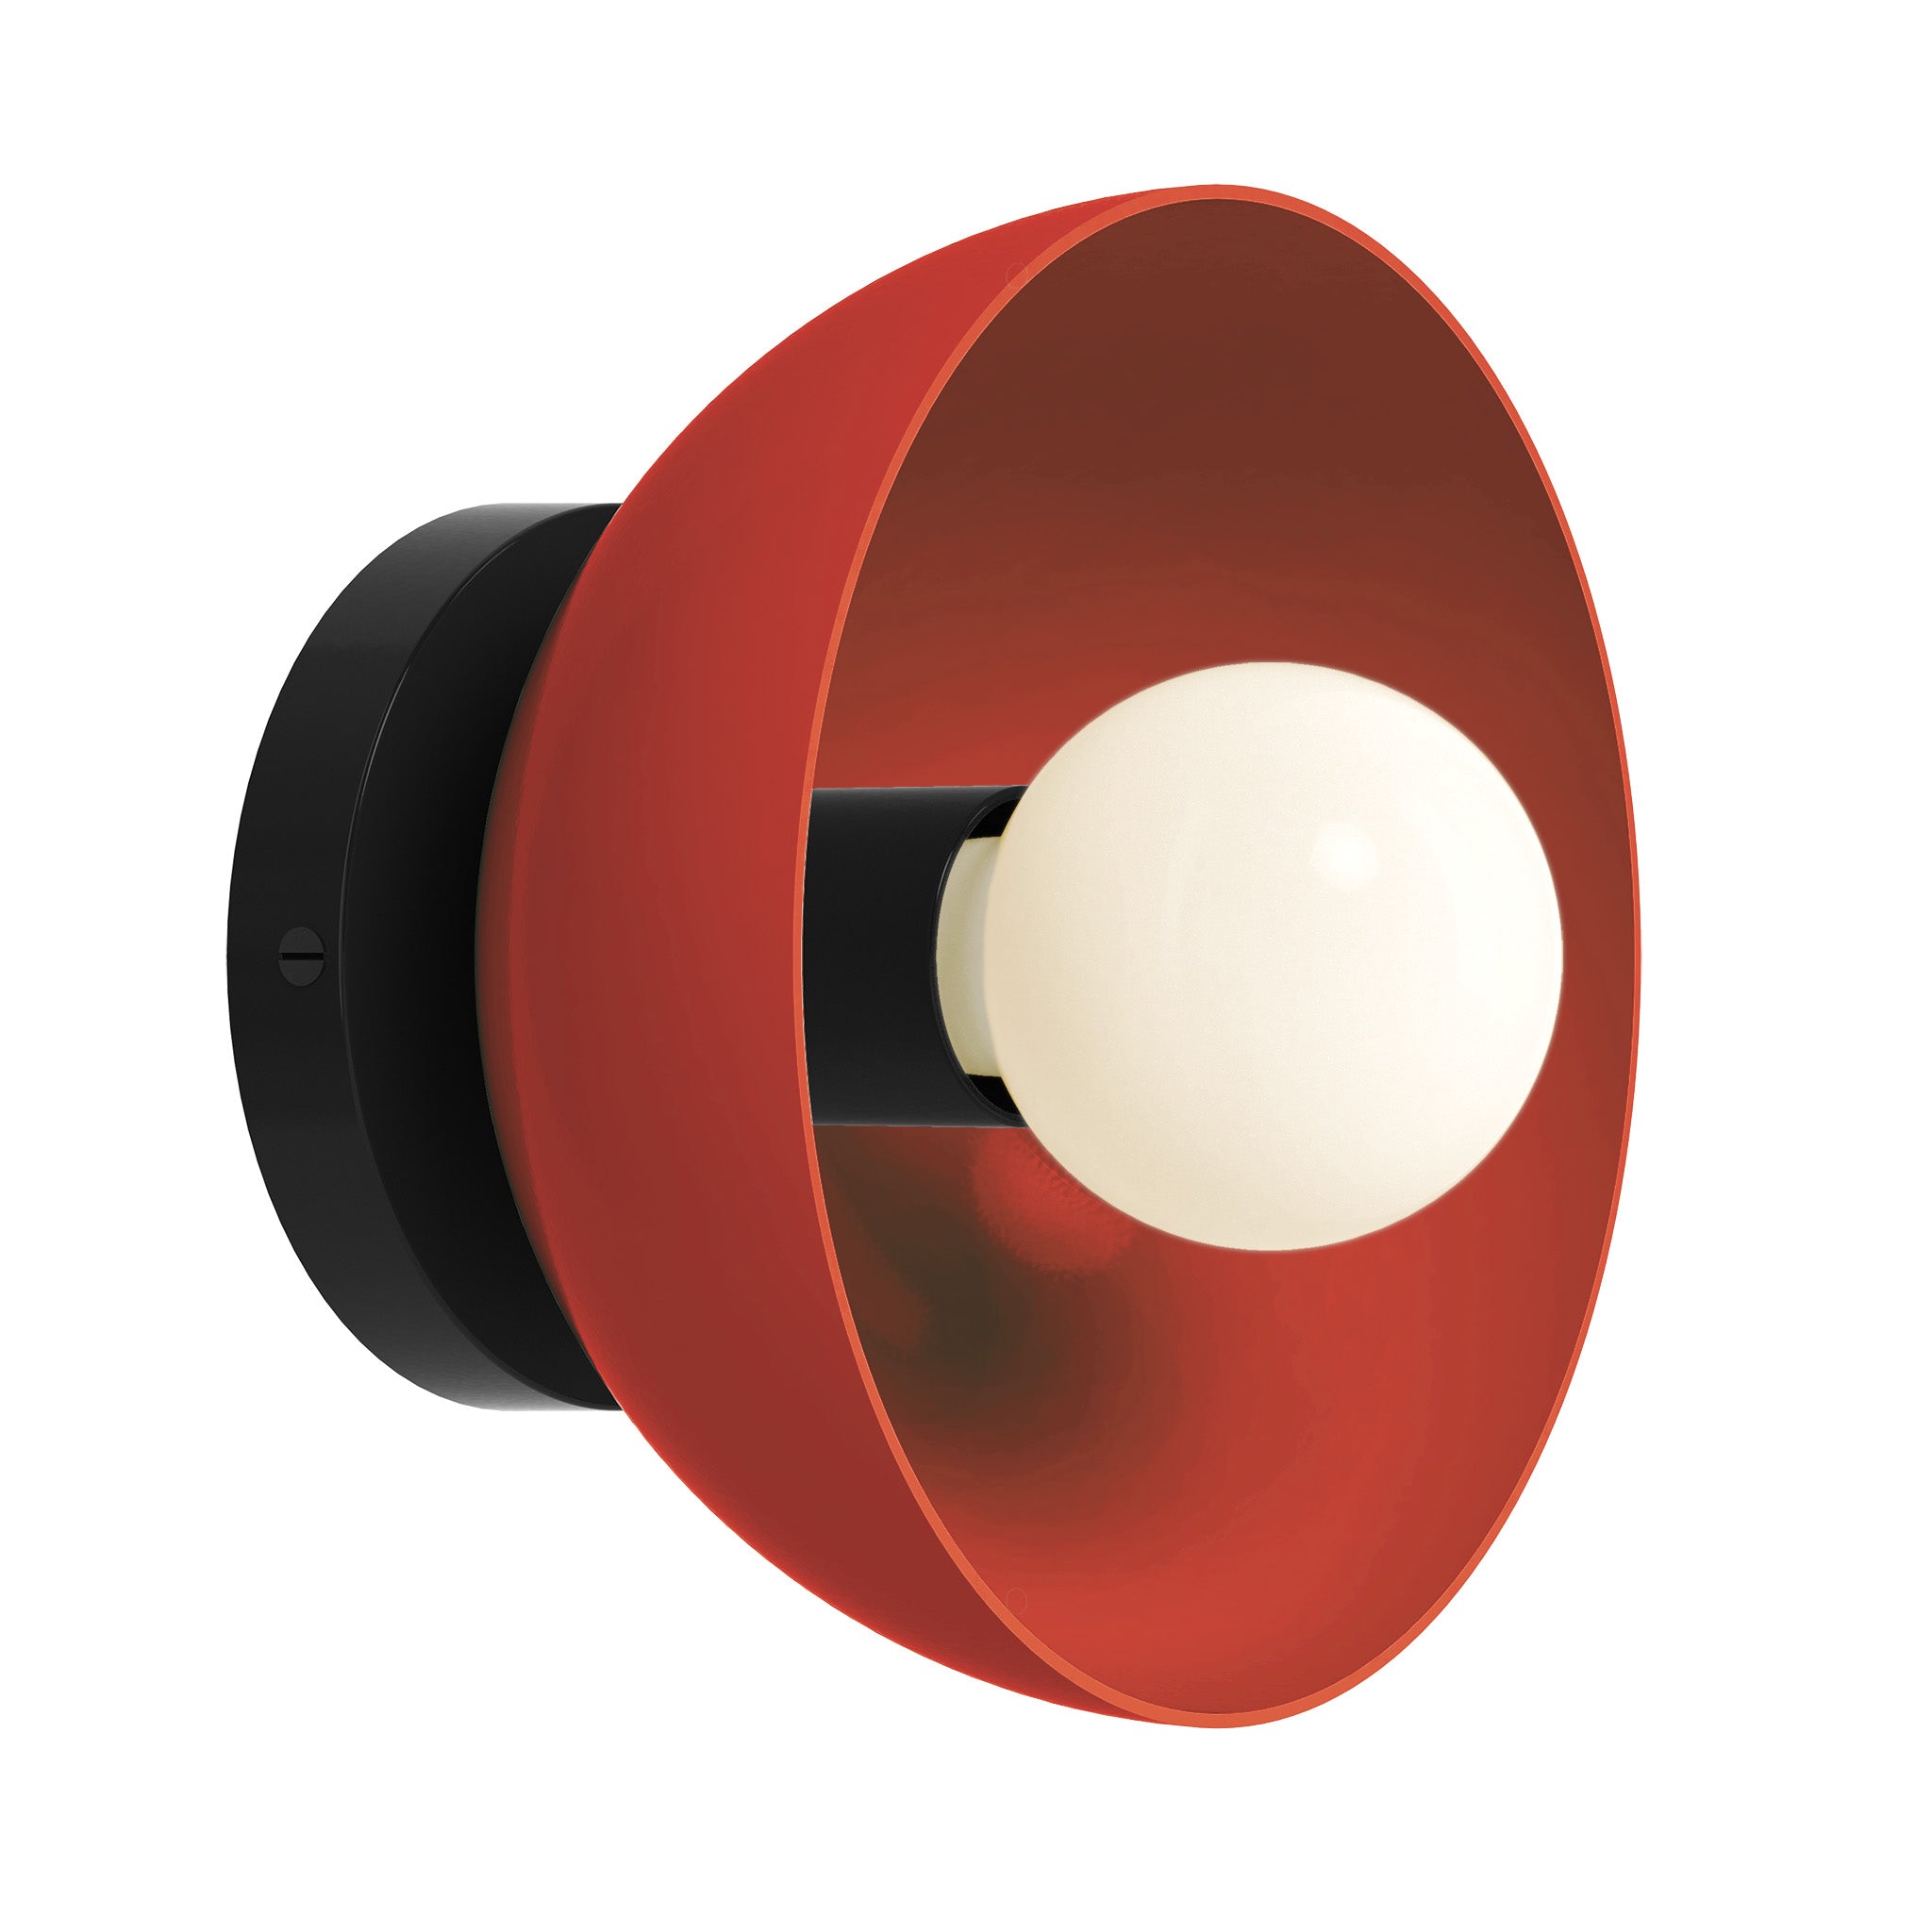 Black and riding hood red color Hemi sconce 8" Dutton Brown lighting